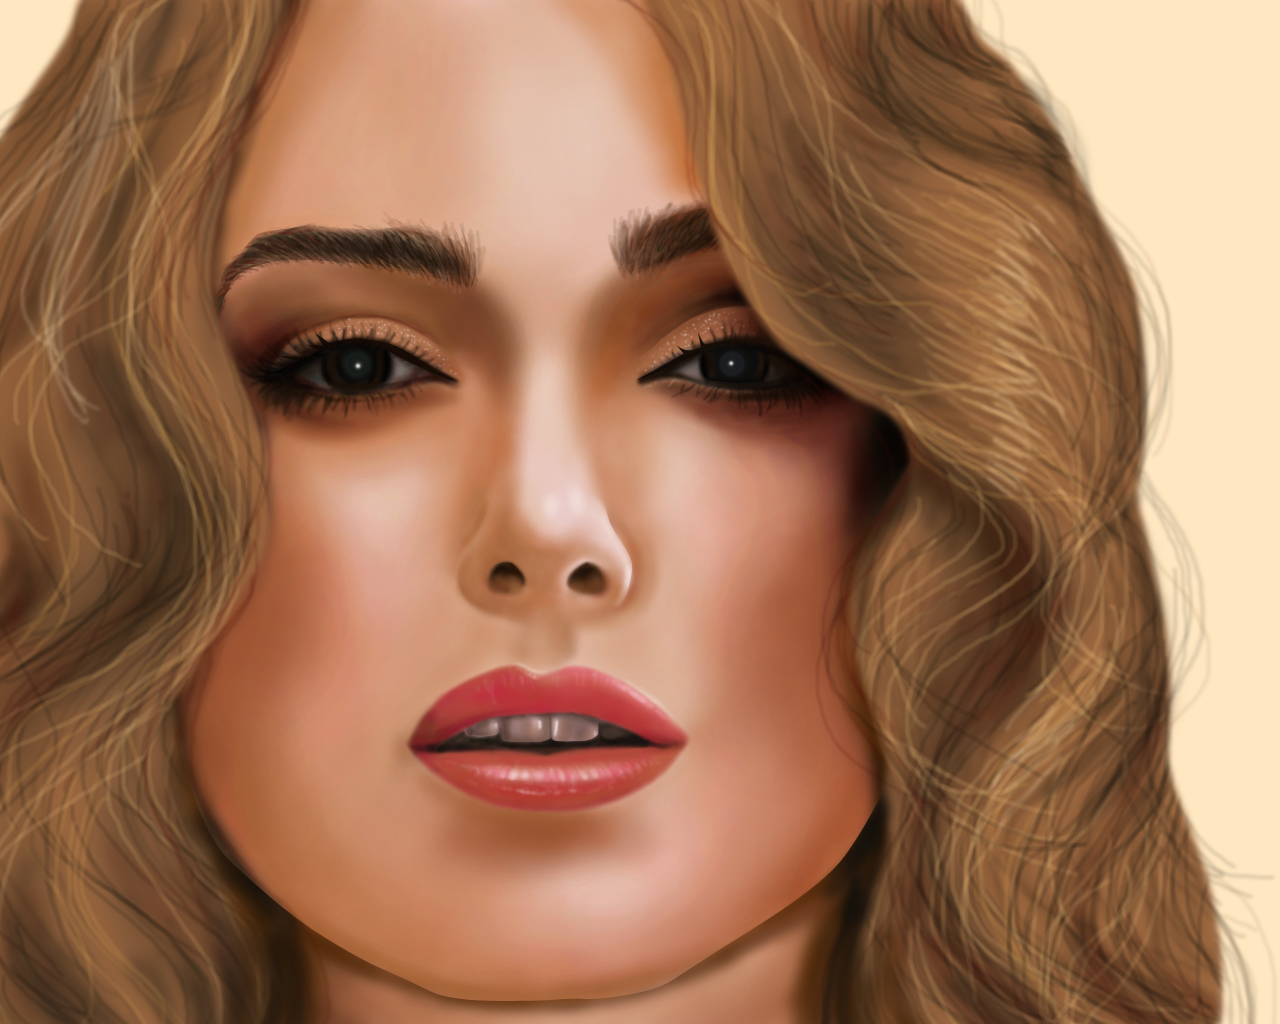 Digital Painting Of A Hollywood Actress | DesiPainters.com